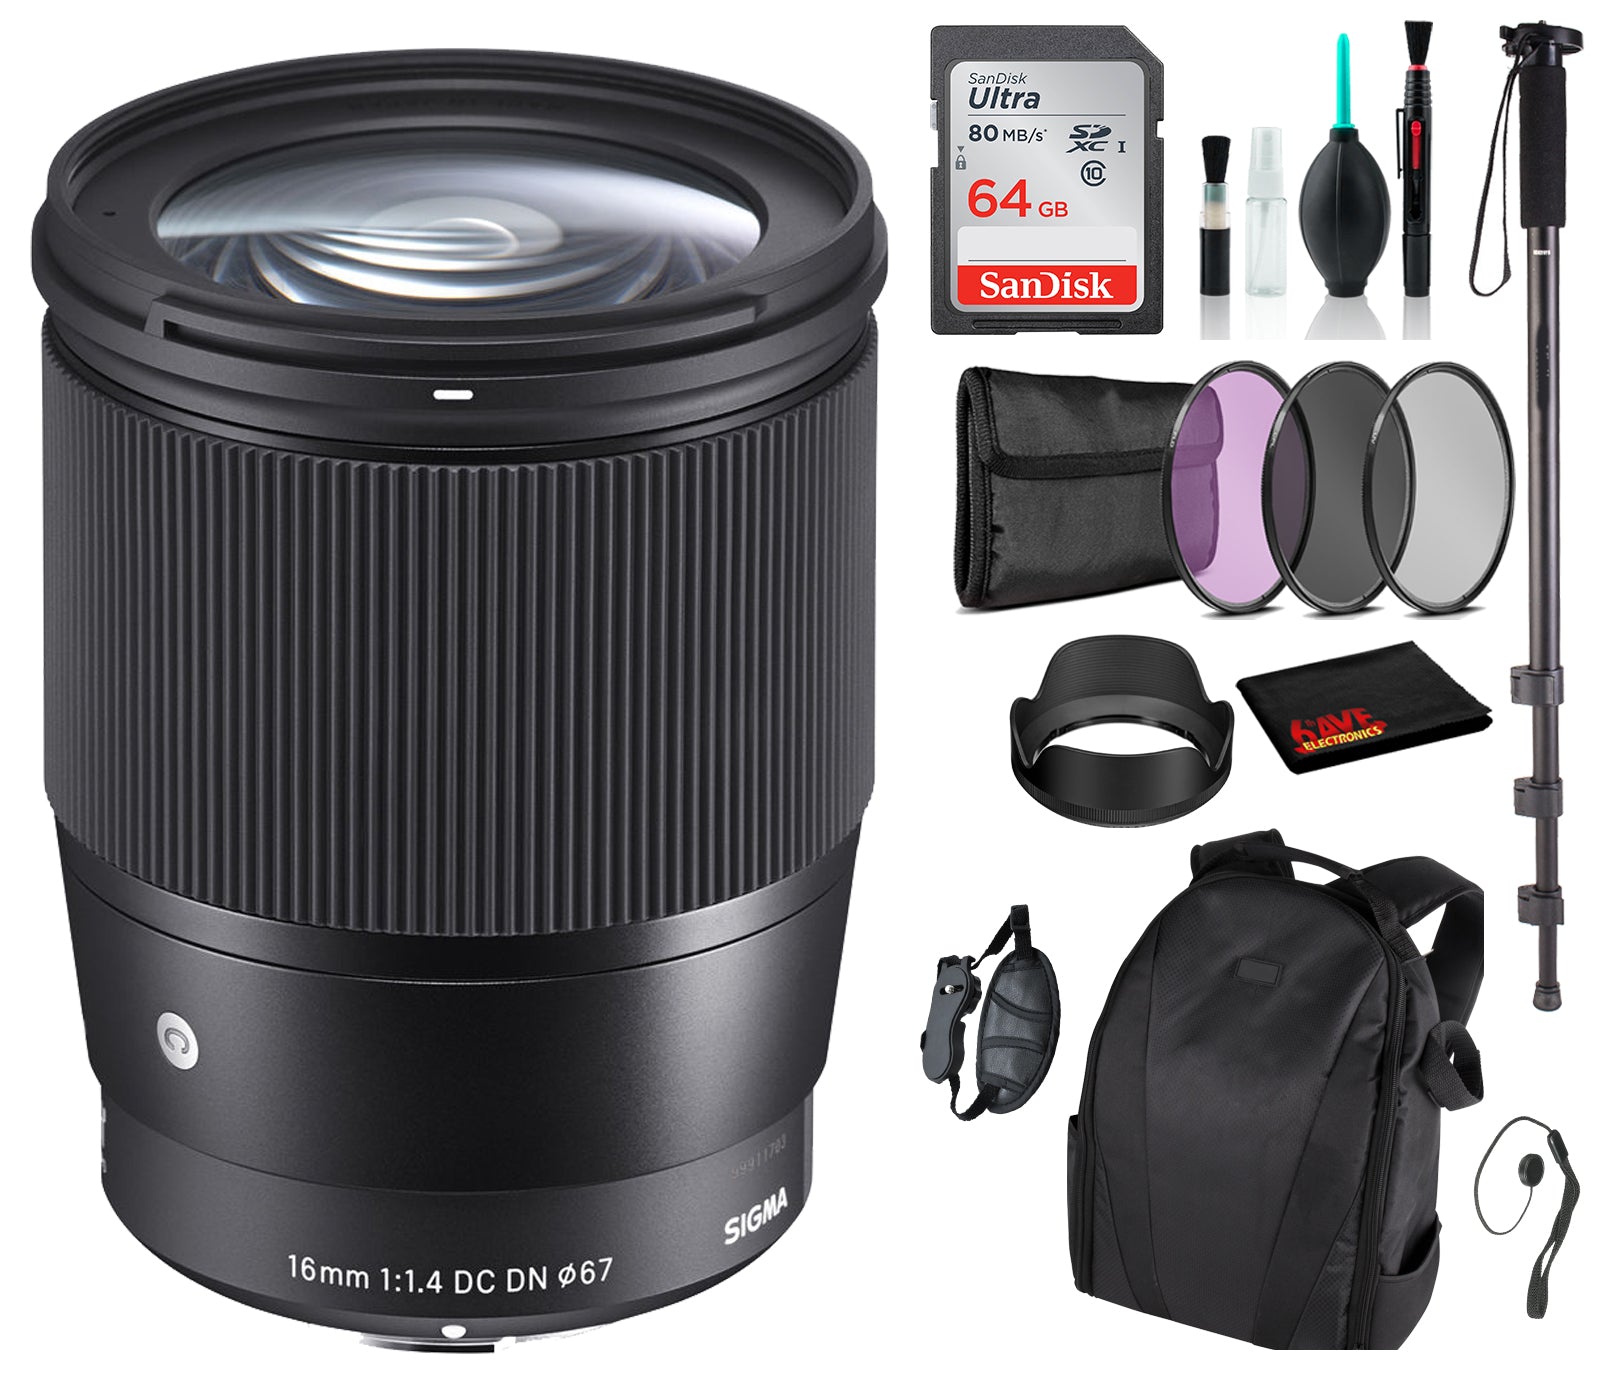 Sigma 16mm f/1.4 DC DN Contemporary Lens for Micro Four Thirds with Advance Bundle: Backpack + Sandisk 64gb SD+ More